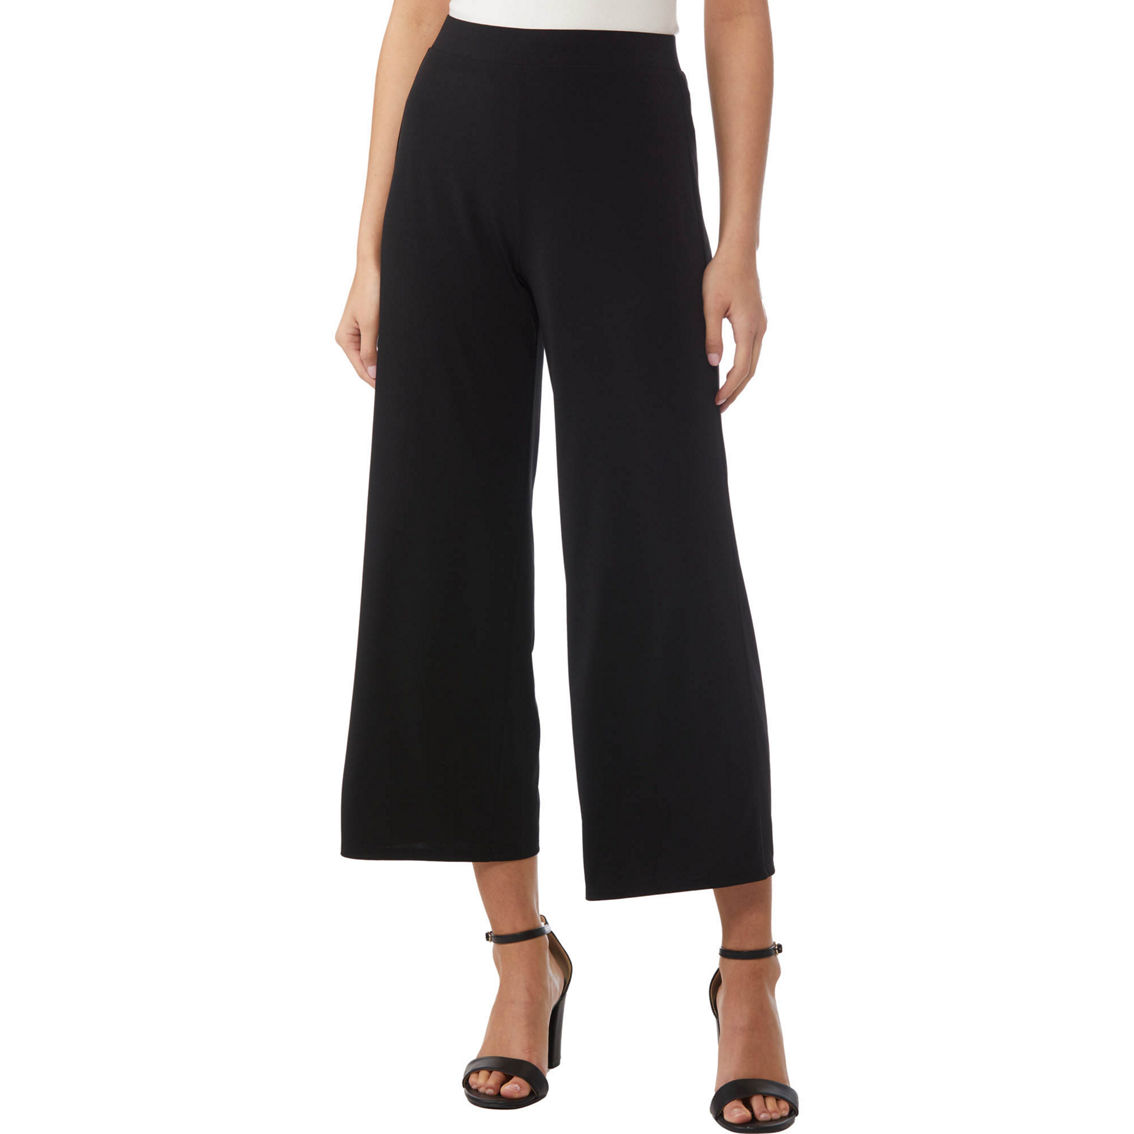 Passports Ity Solid Crop Pants | Pants | Clothing & Accessories | Shop ...